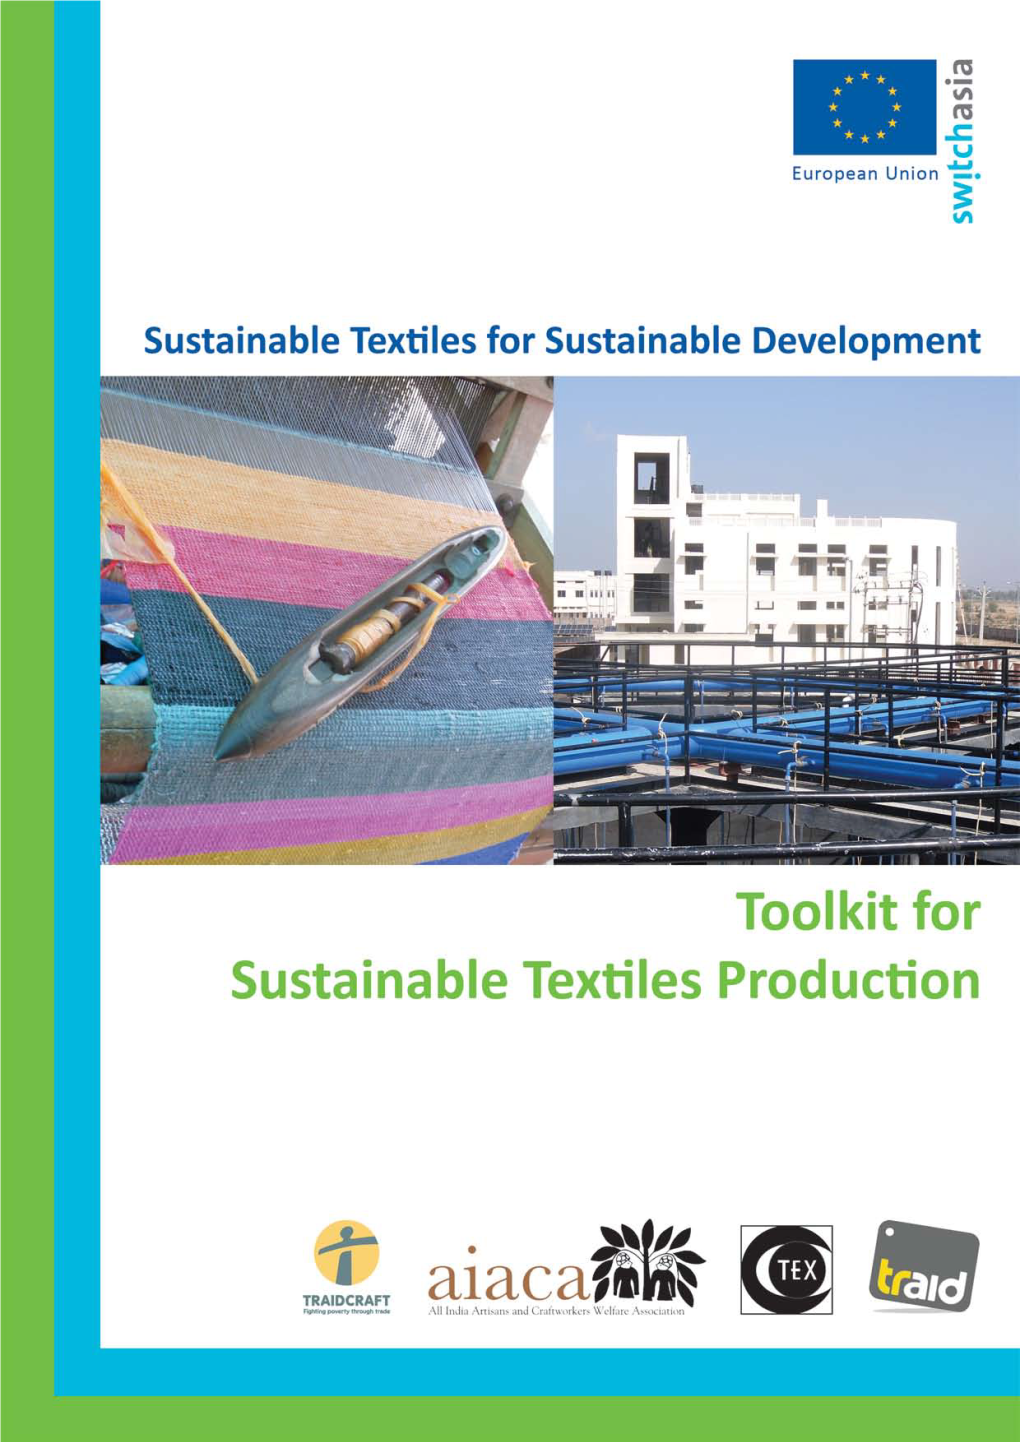 Toolkit for Sustainable Textile Production